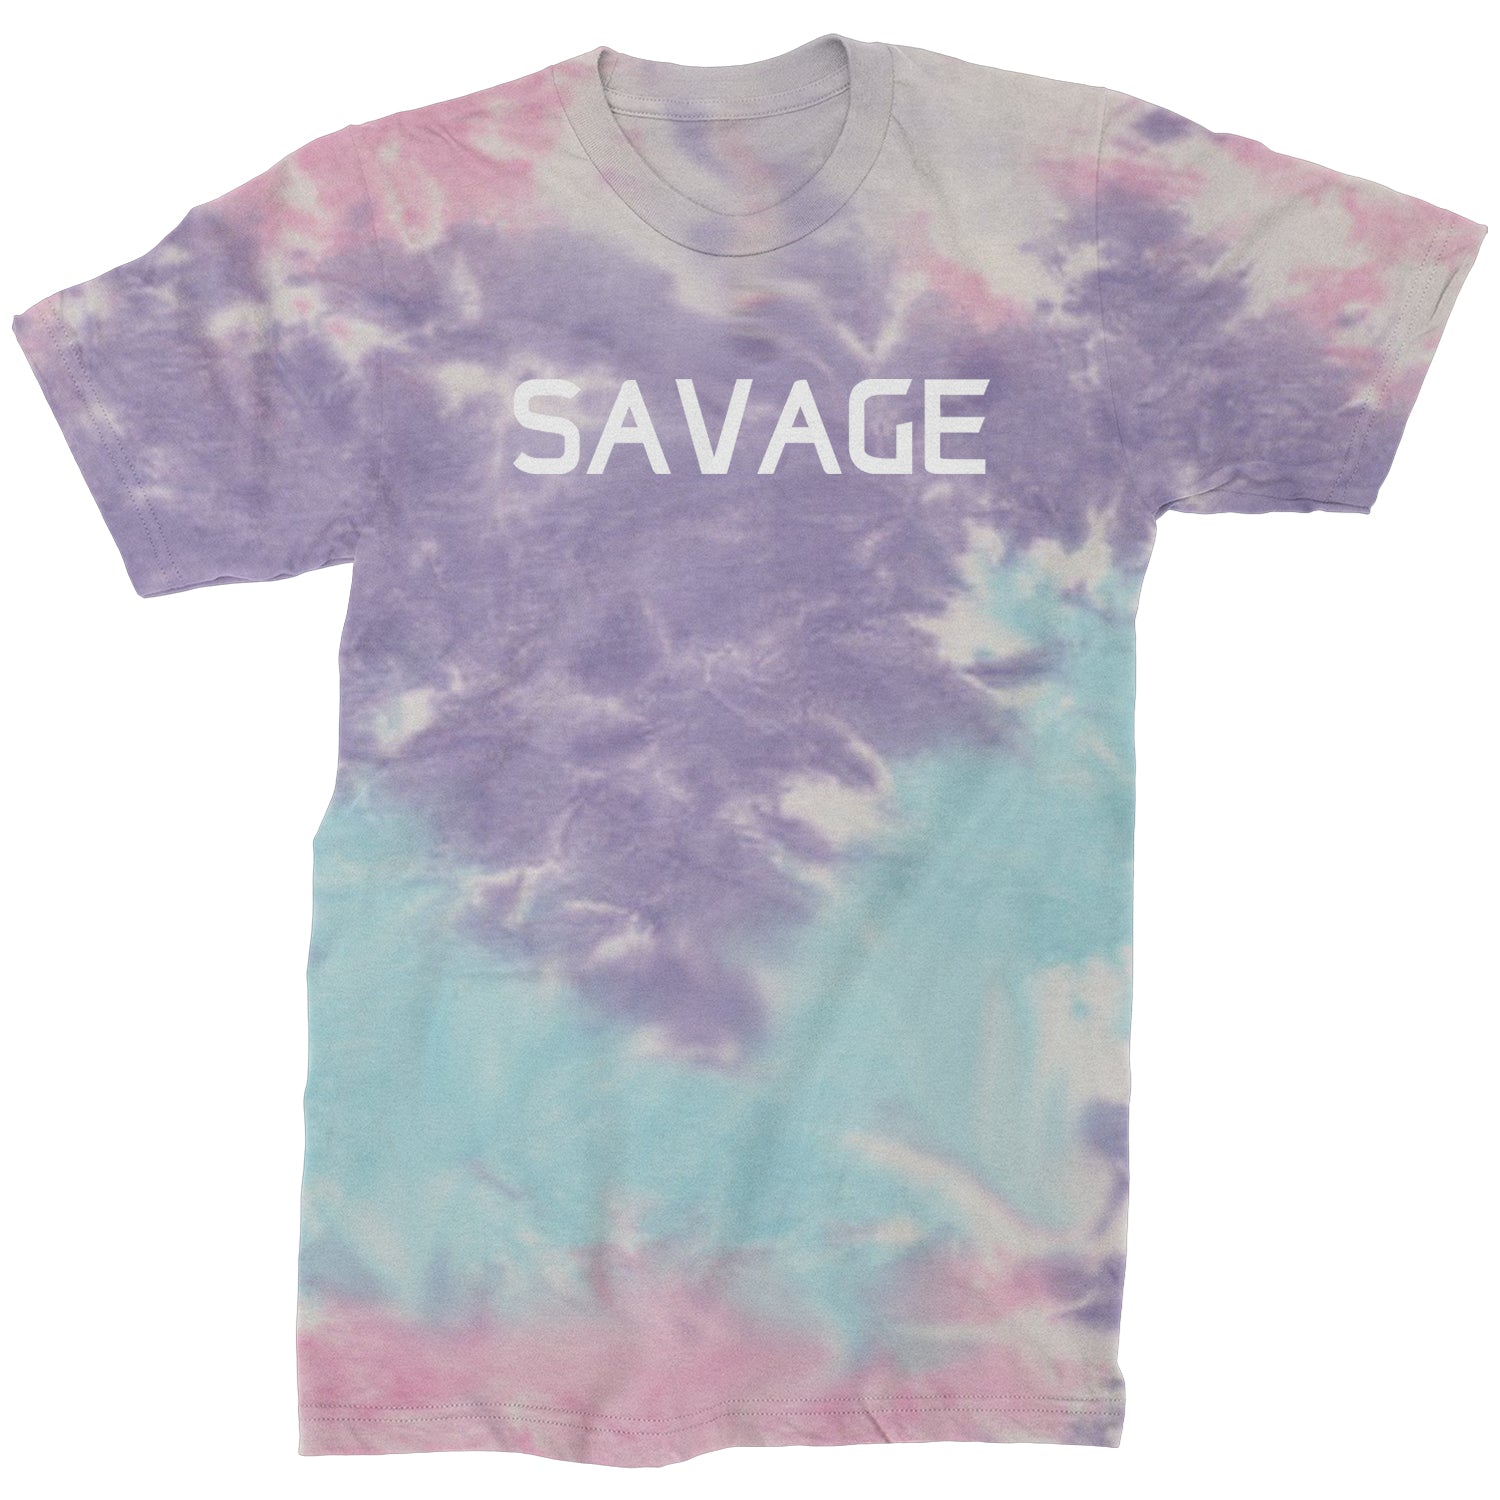 Savage Mens T-shirt #expressiontees by Expression Tees